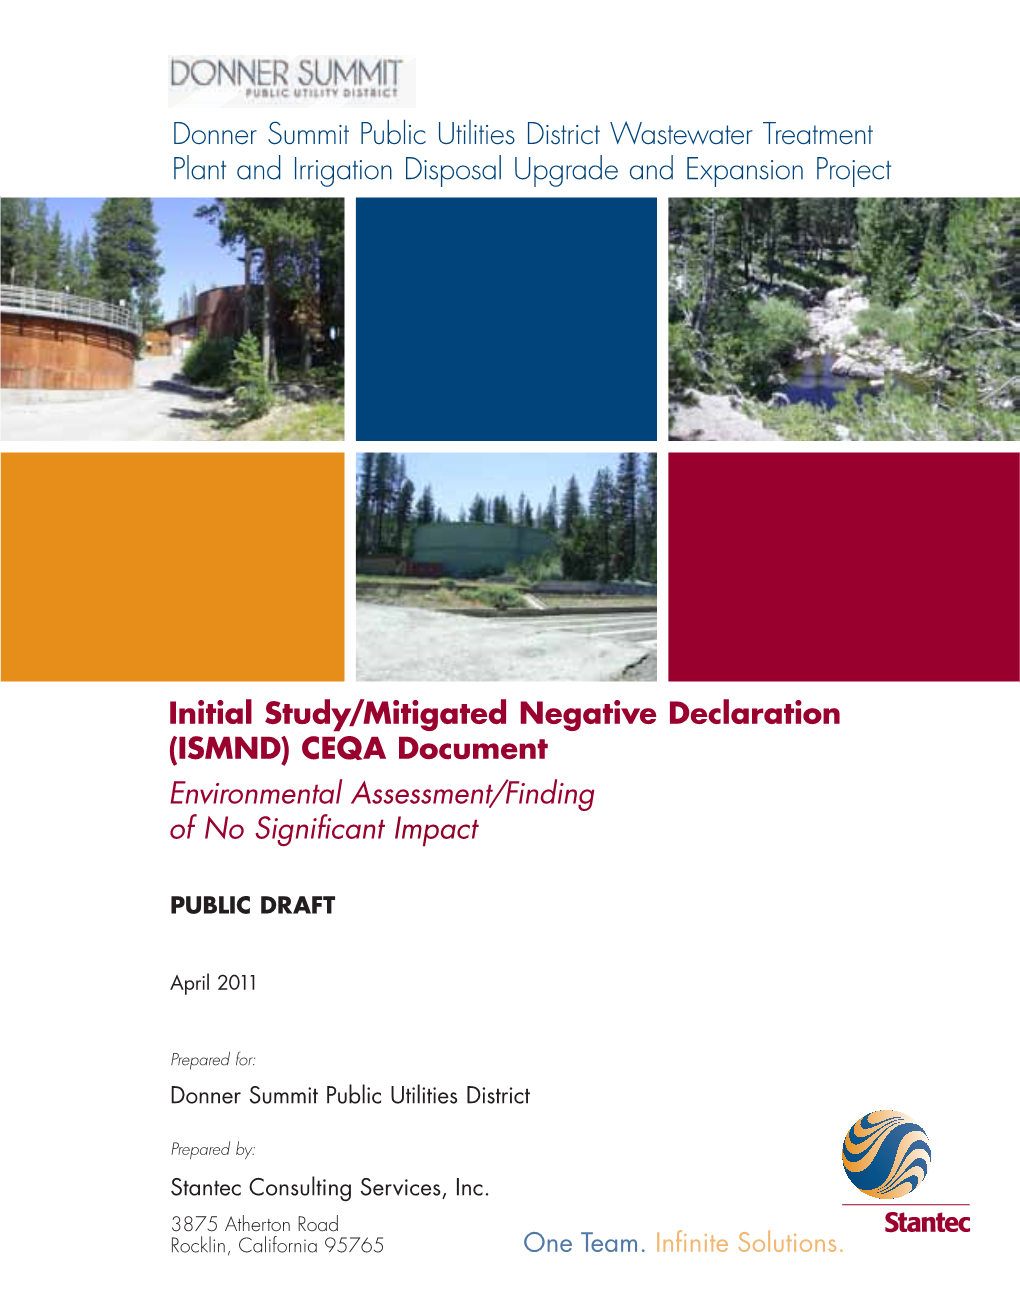 CEQA Document Environmental Assessment/Finding of No Significant Impact